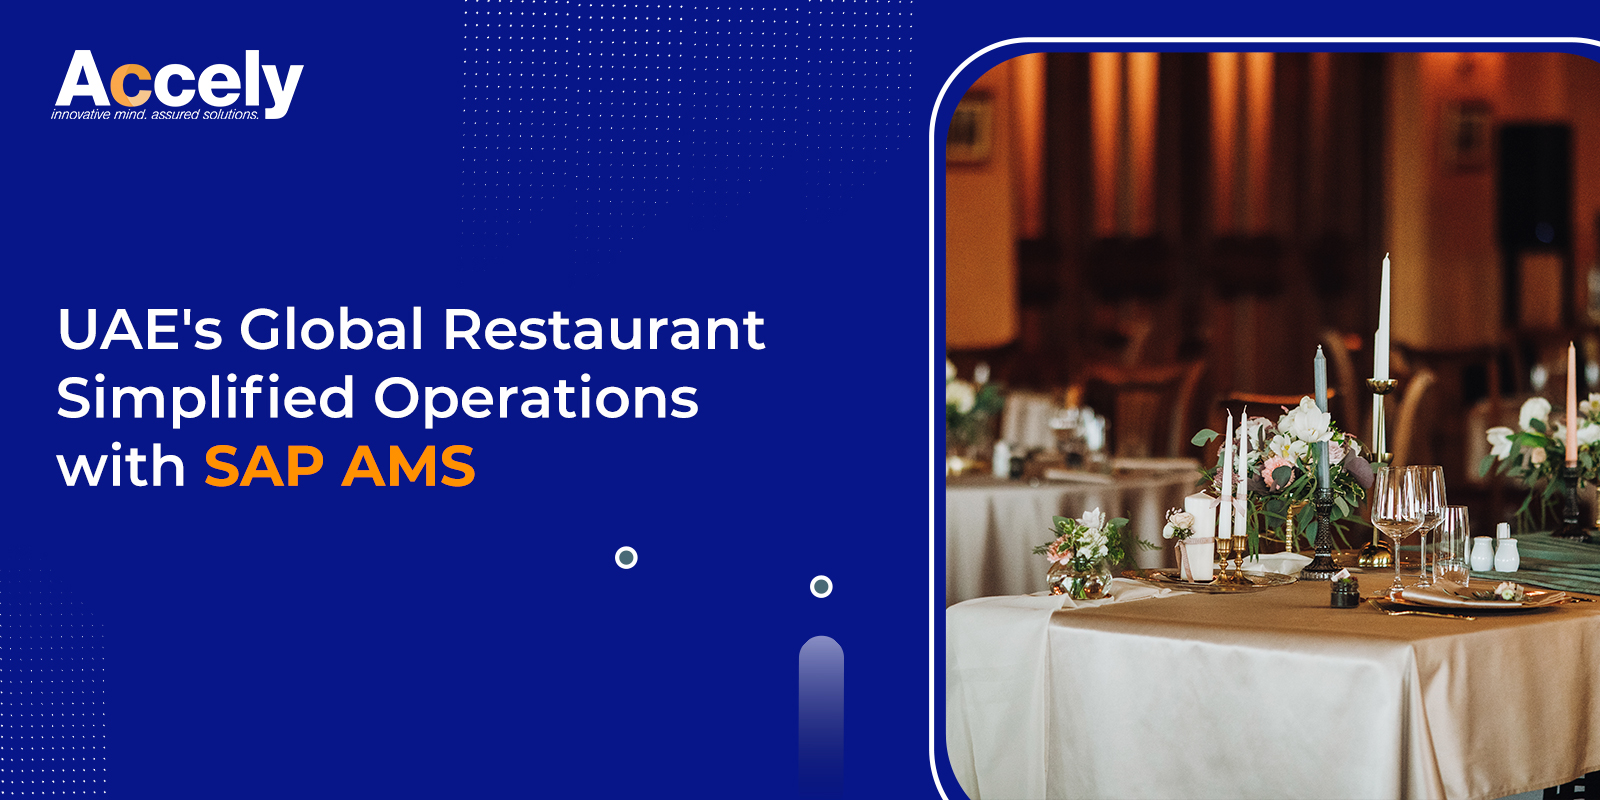 UAE's Global Restaurant Simplified Operations with SAP AMS